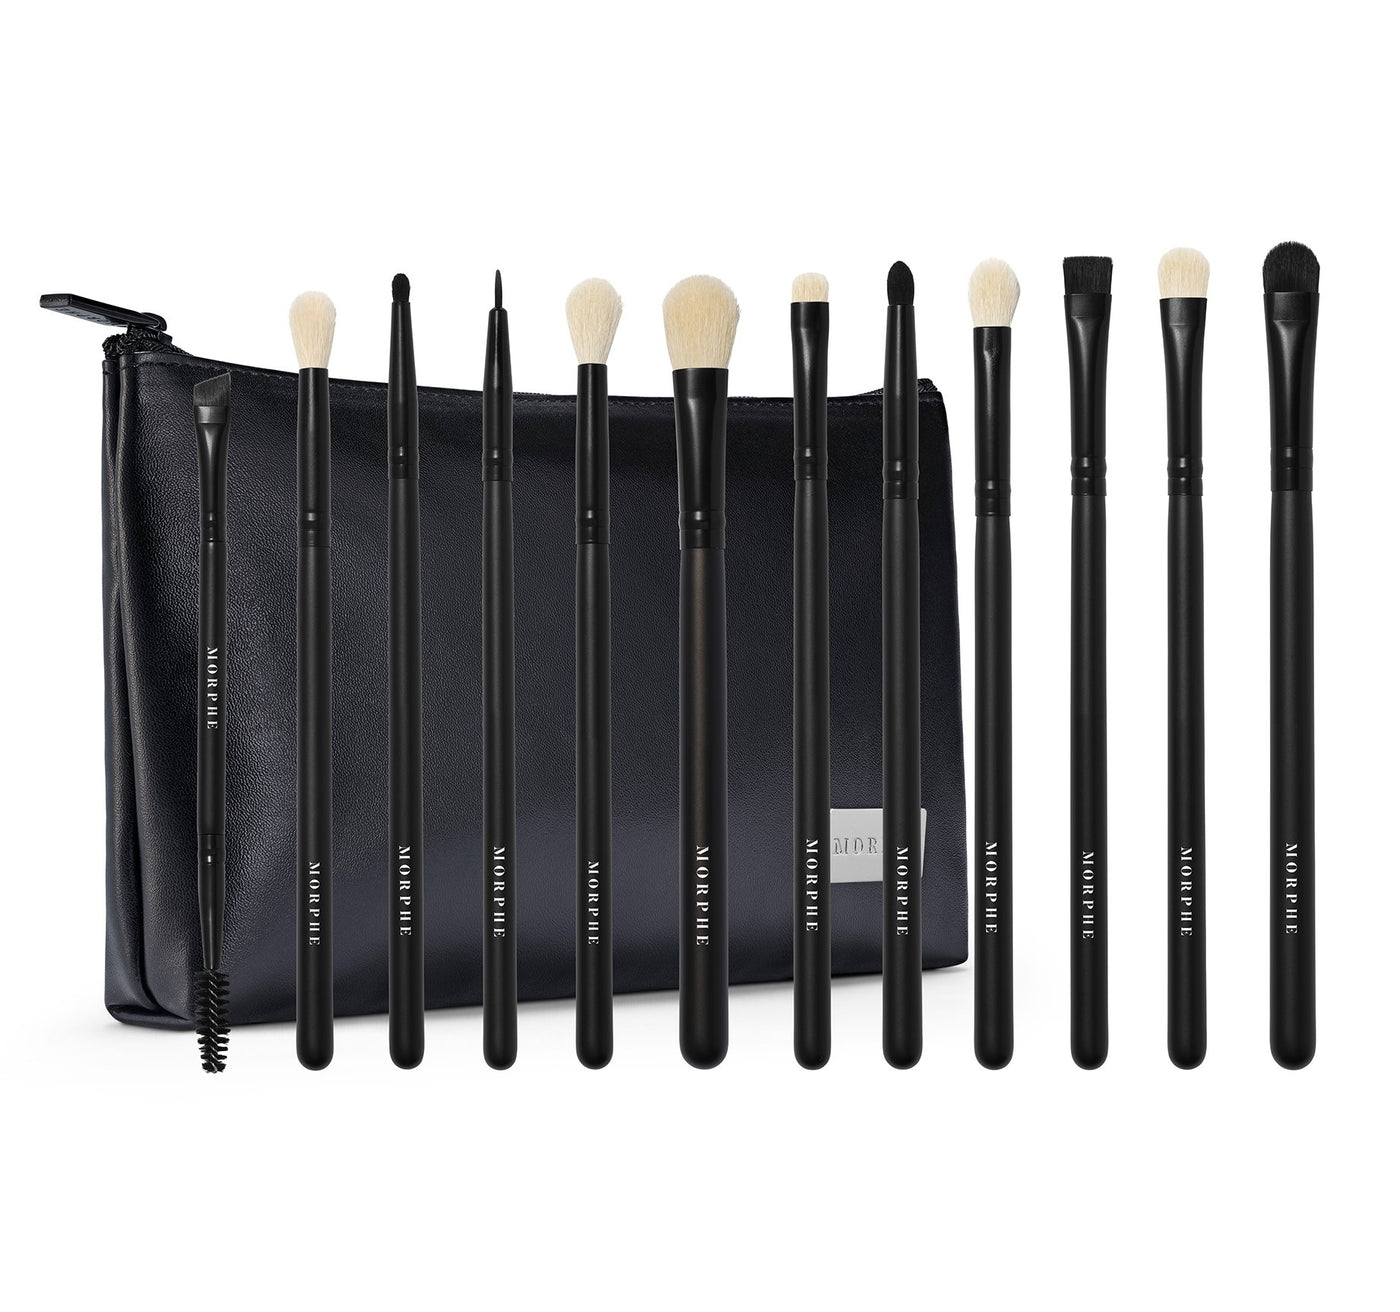 Morphe Eye Obsessed Makeup Brush Collection